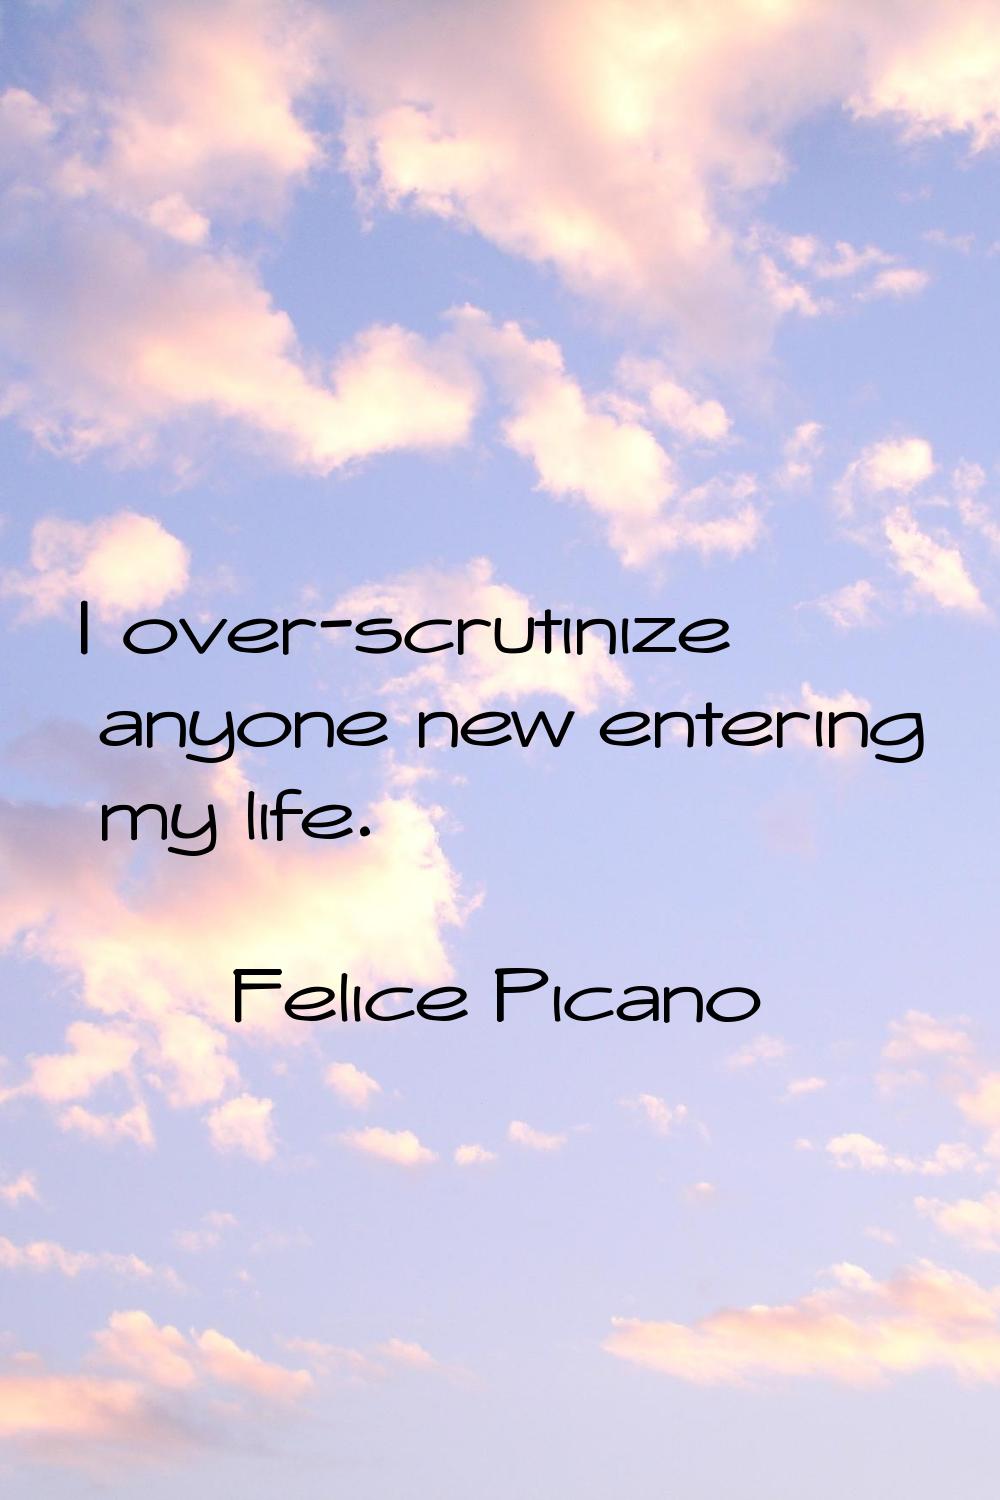 I over-scrutinize anyone new entering my life.